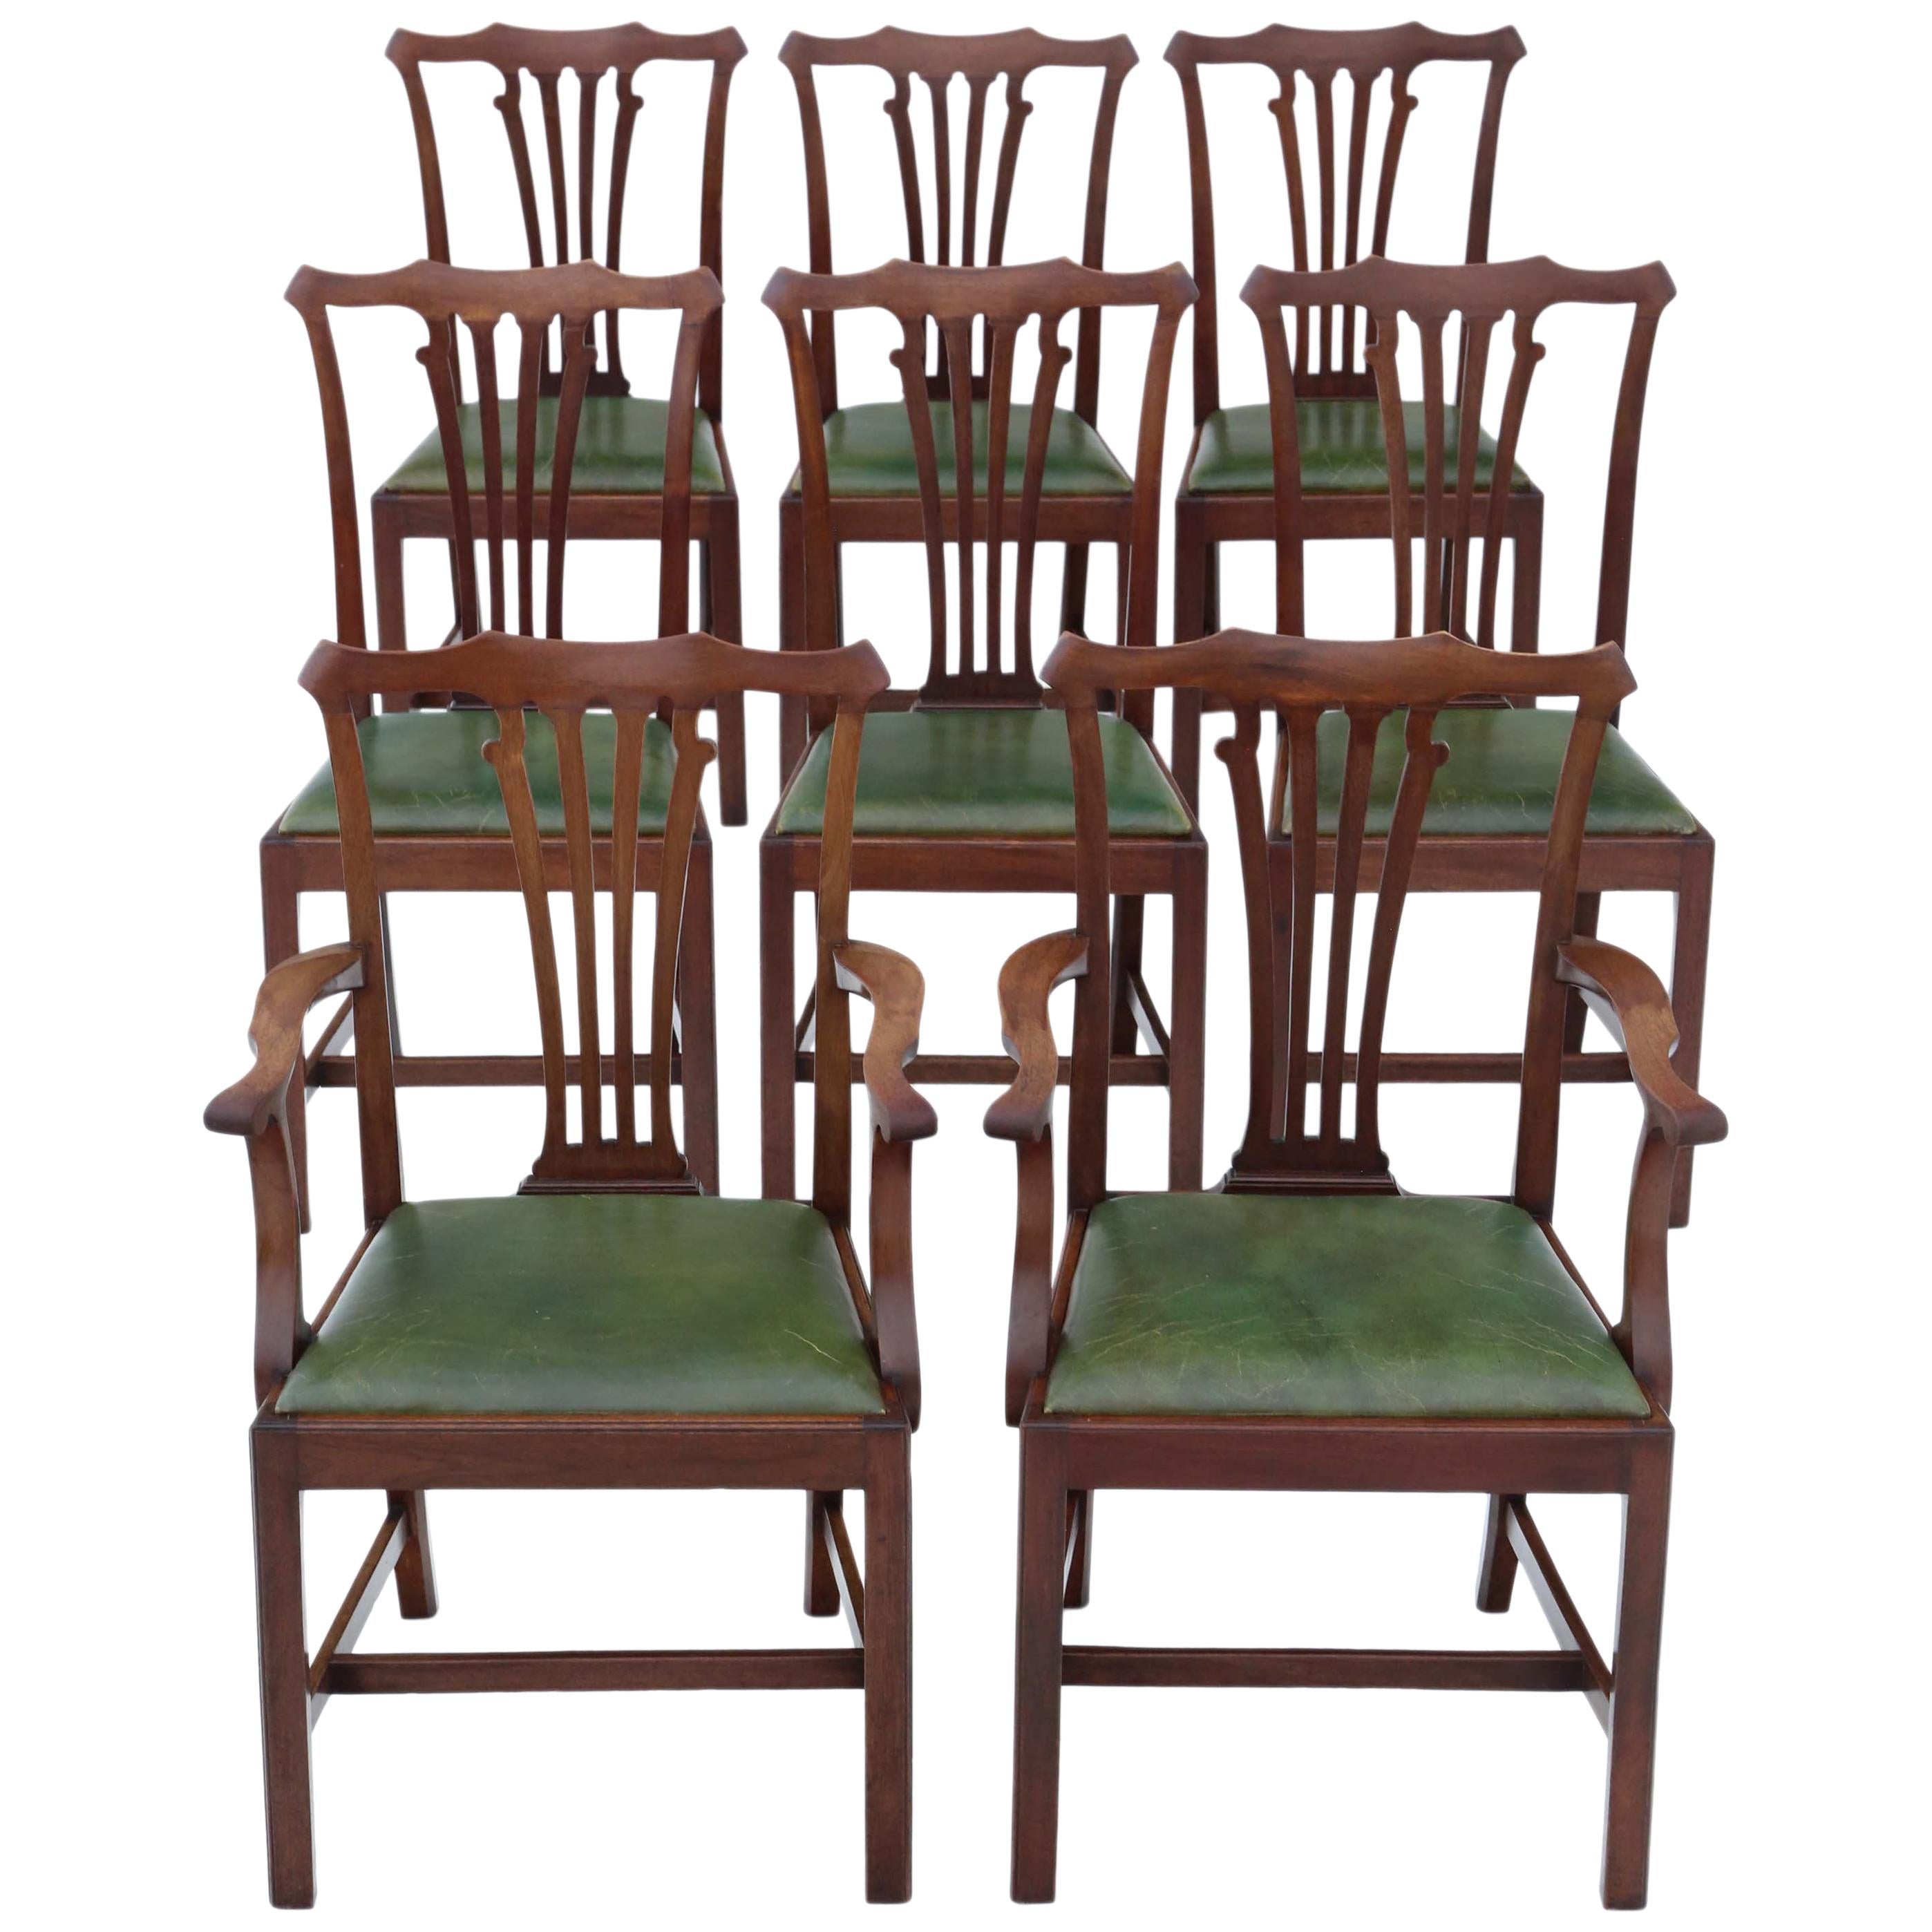 Antique Set of 8 Mahogany Dining Chairs, Mid-19th Century